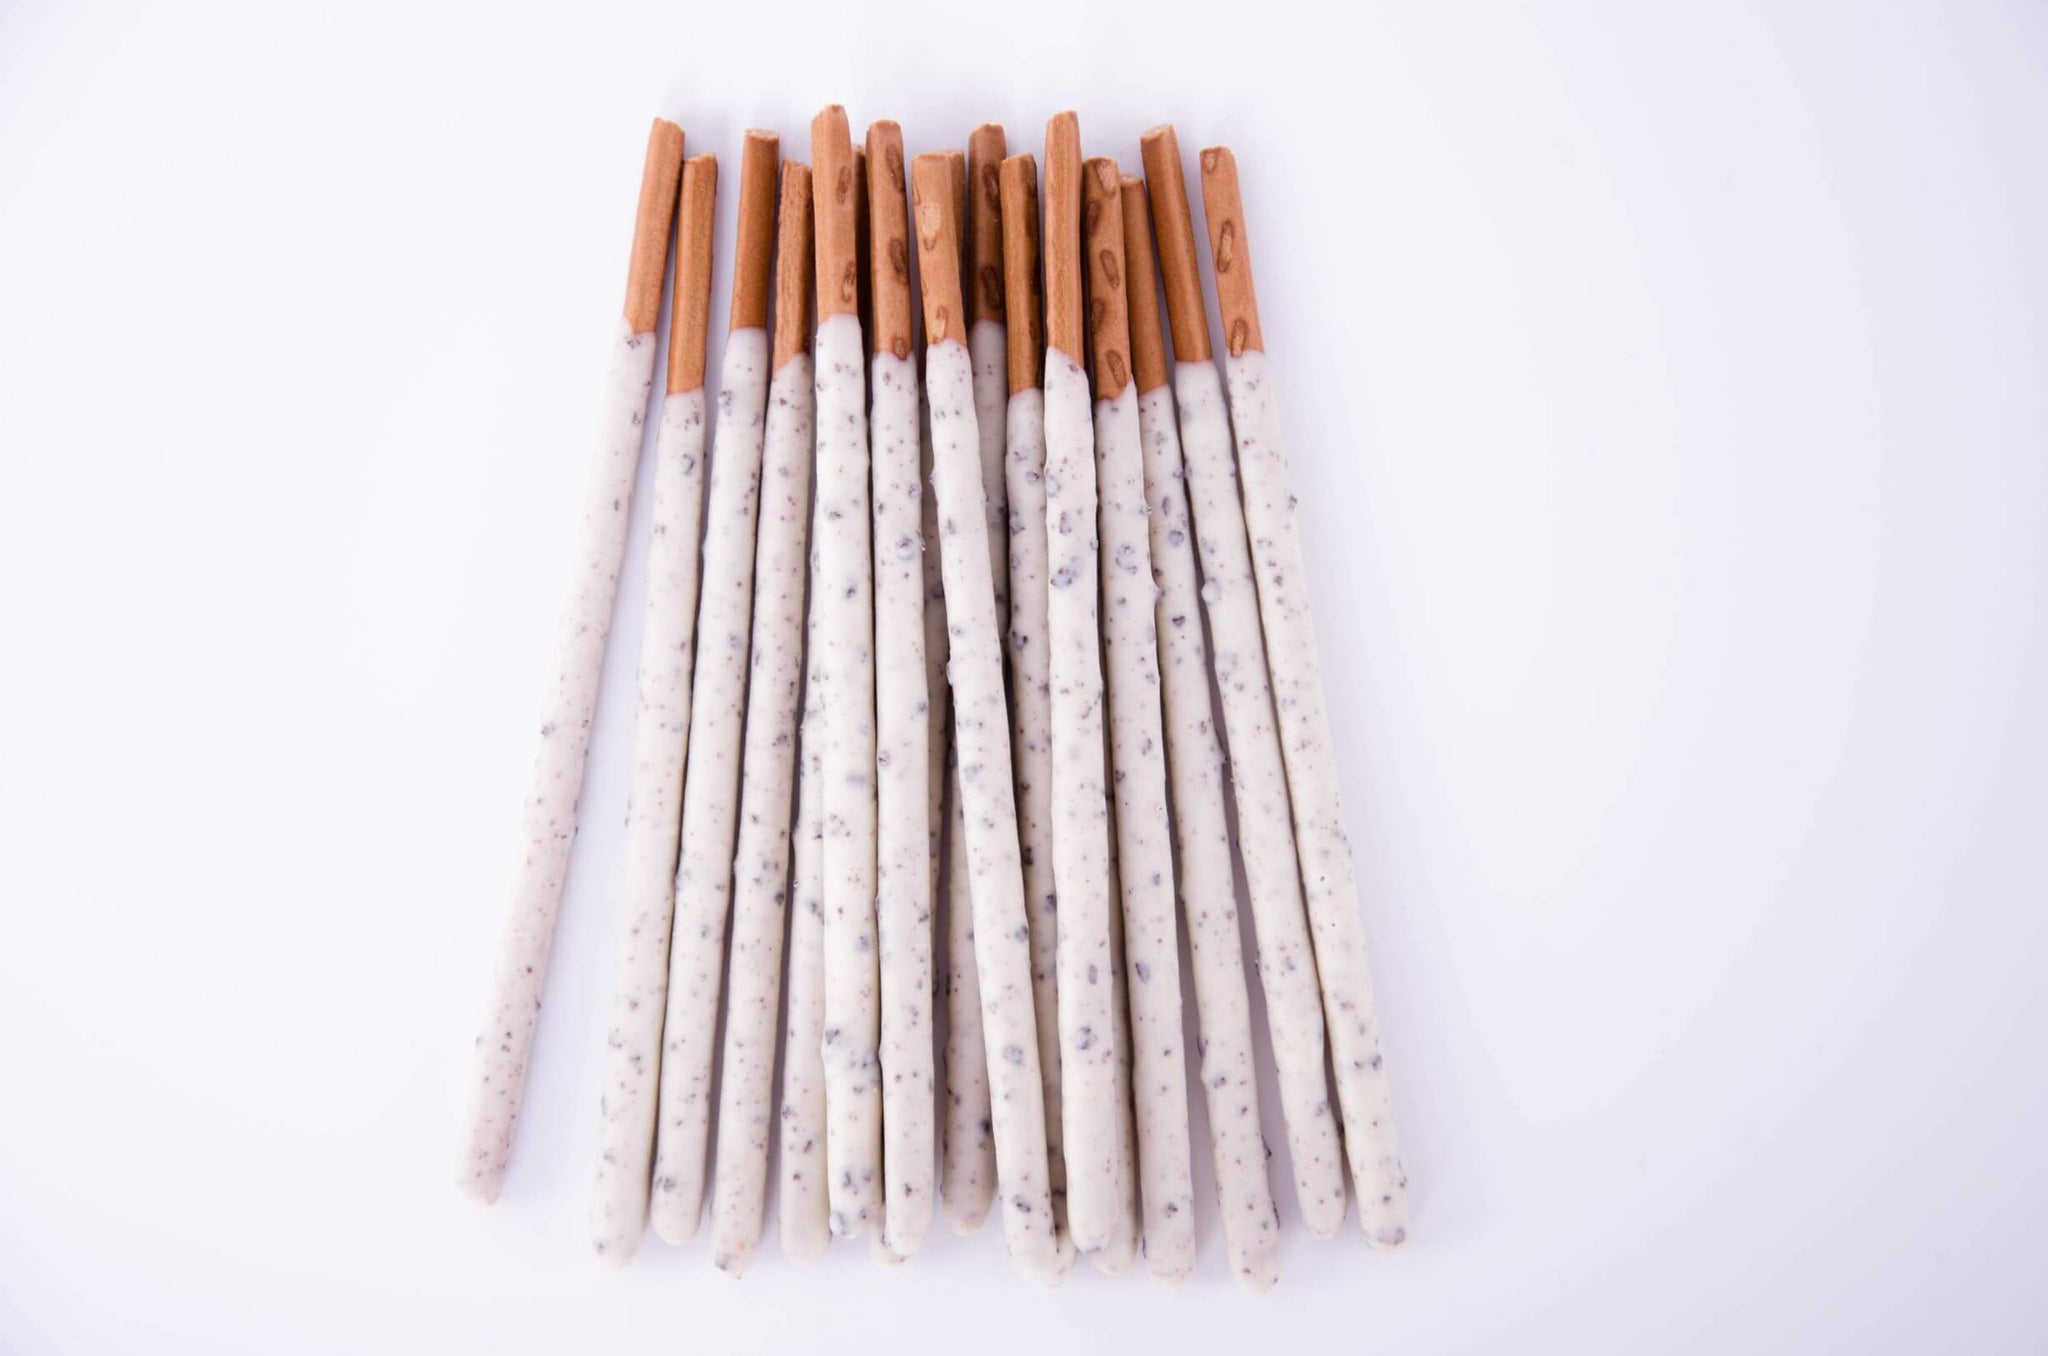 The unique Japanese Pocky flavor of traditional biscuit and chocolate dipping are elevated with a layer of coconut flakes